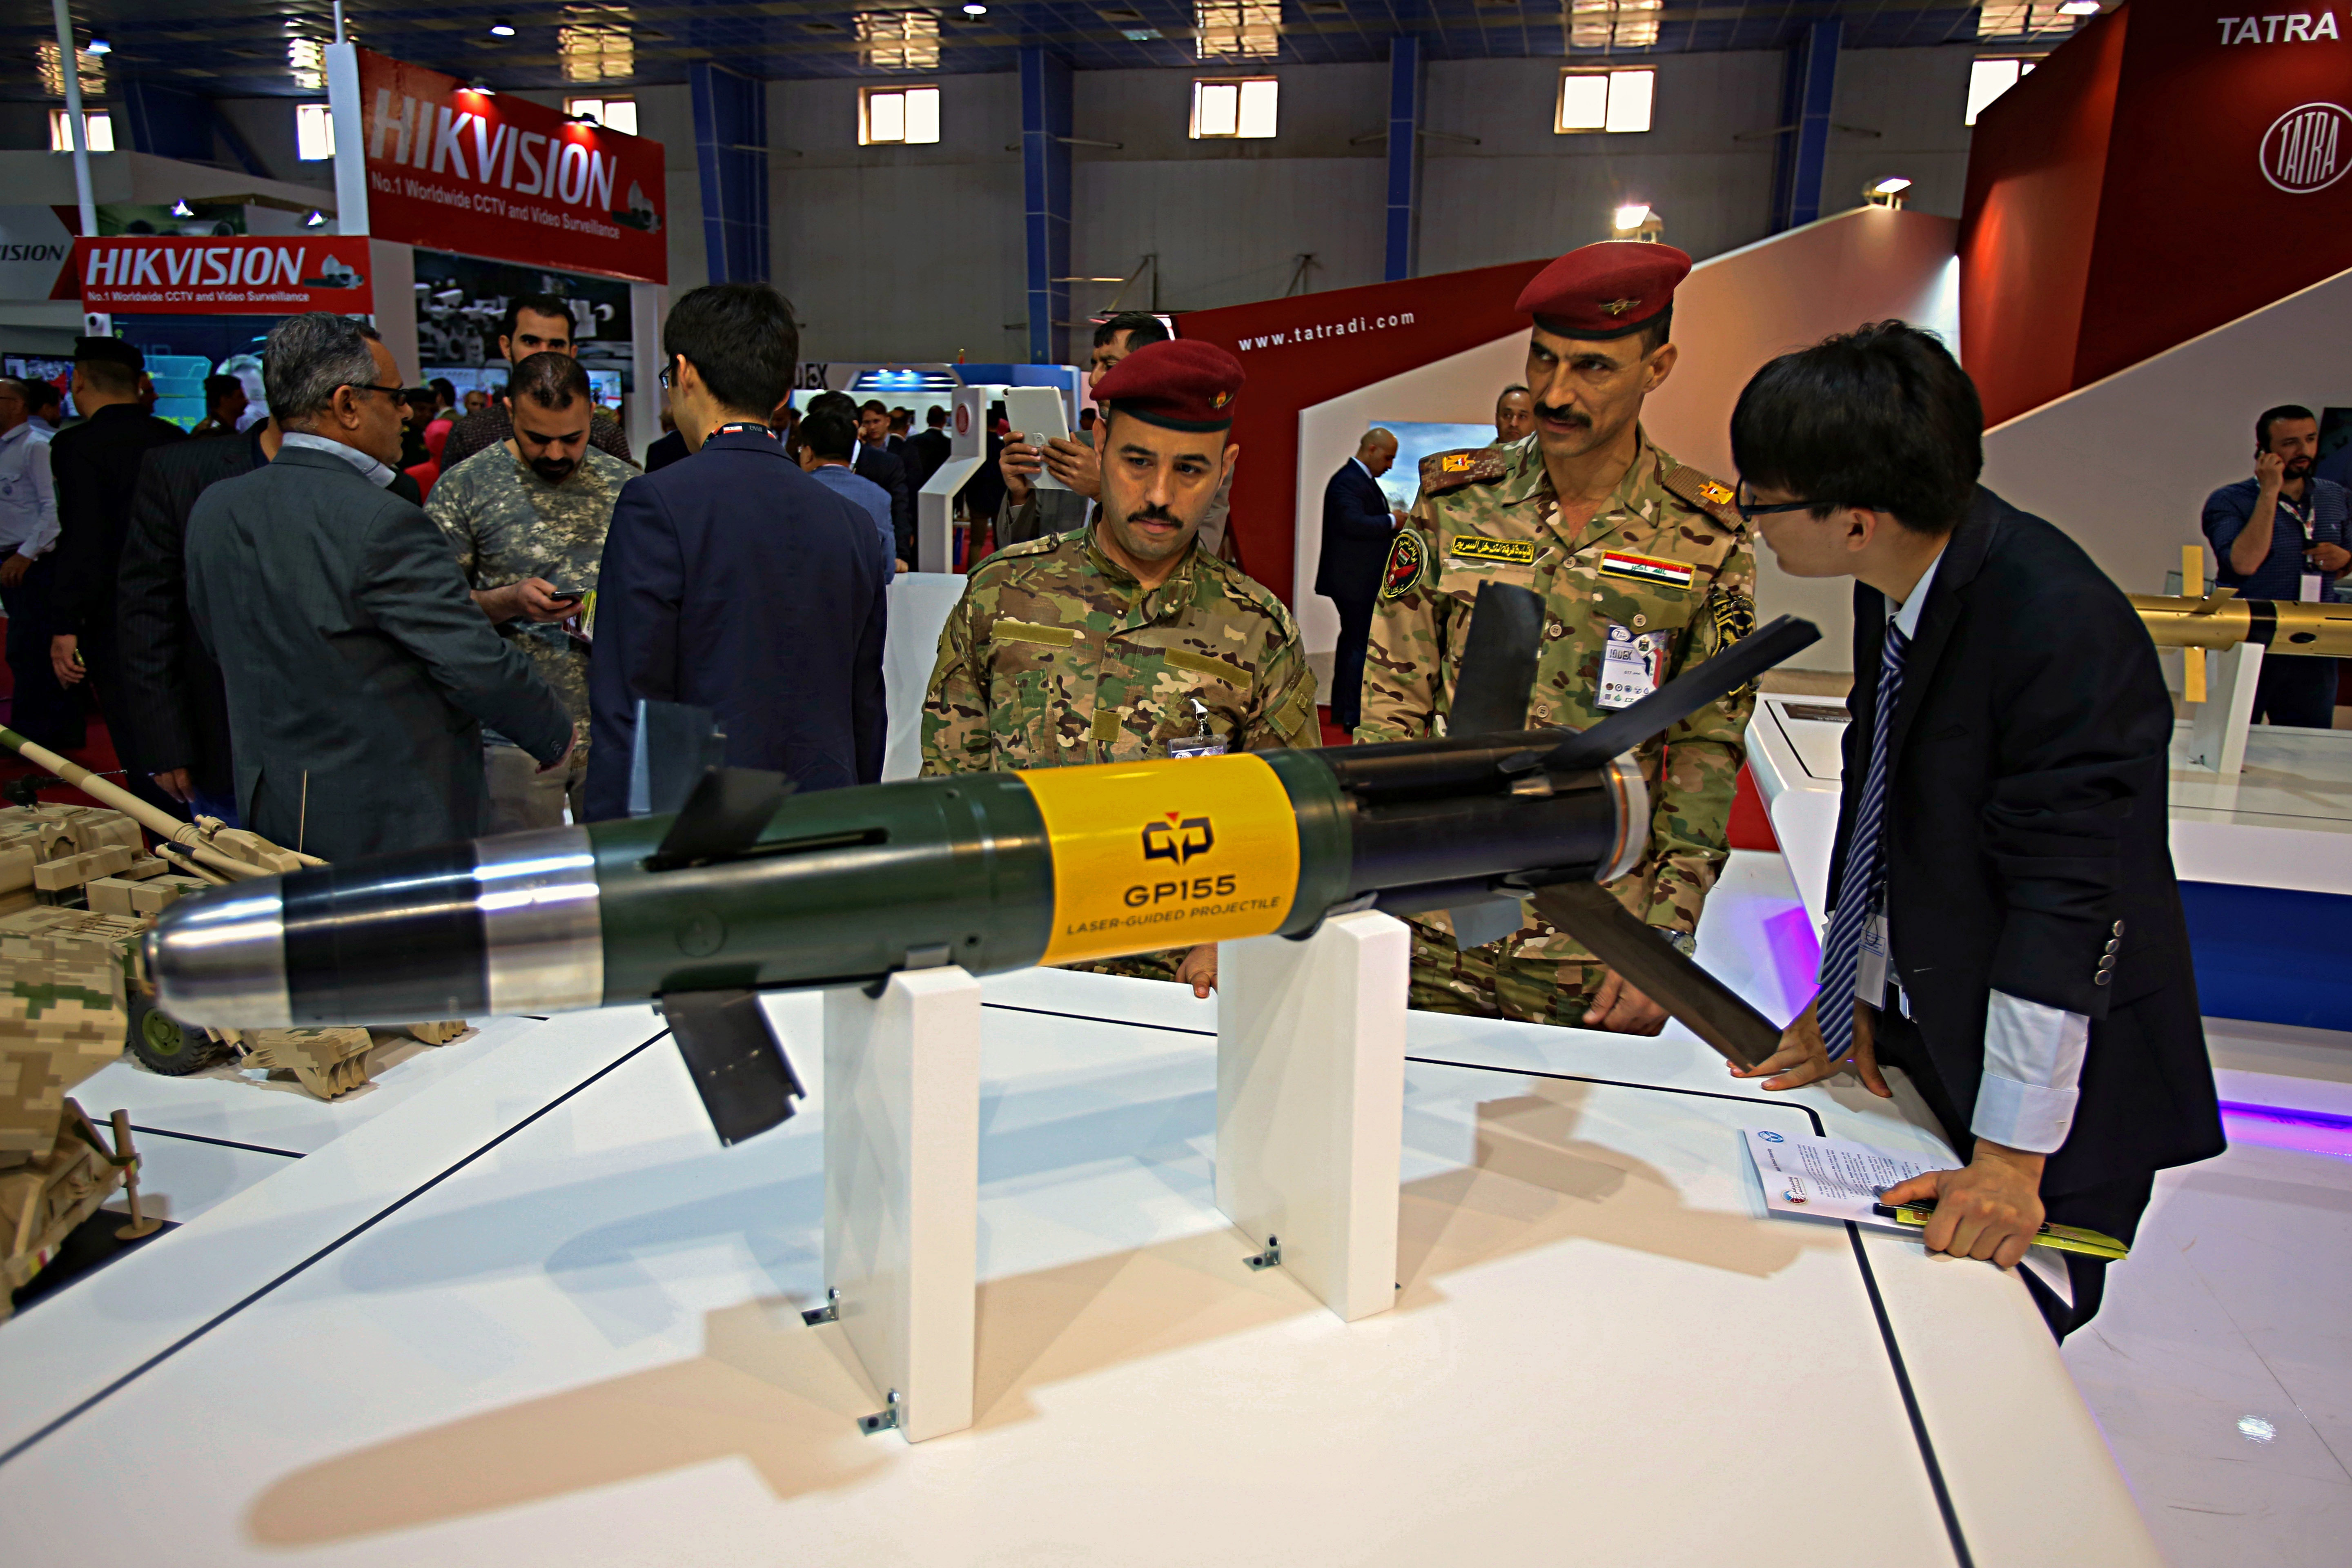 Visitors attending the seventh annual weapons exhibition organized by the Iraqi ministry of defense look at a laser guided projectile, at the Baghdad International Fairgrounds, Sunday, March, 11, 2018. (AP Photo/Karim Kadim)